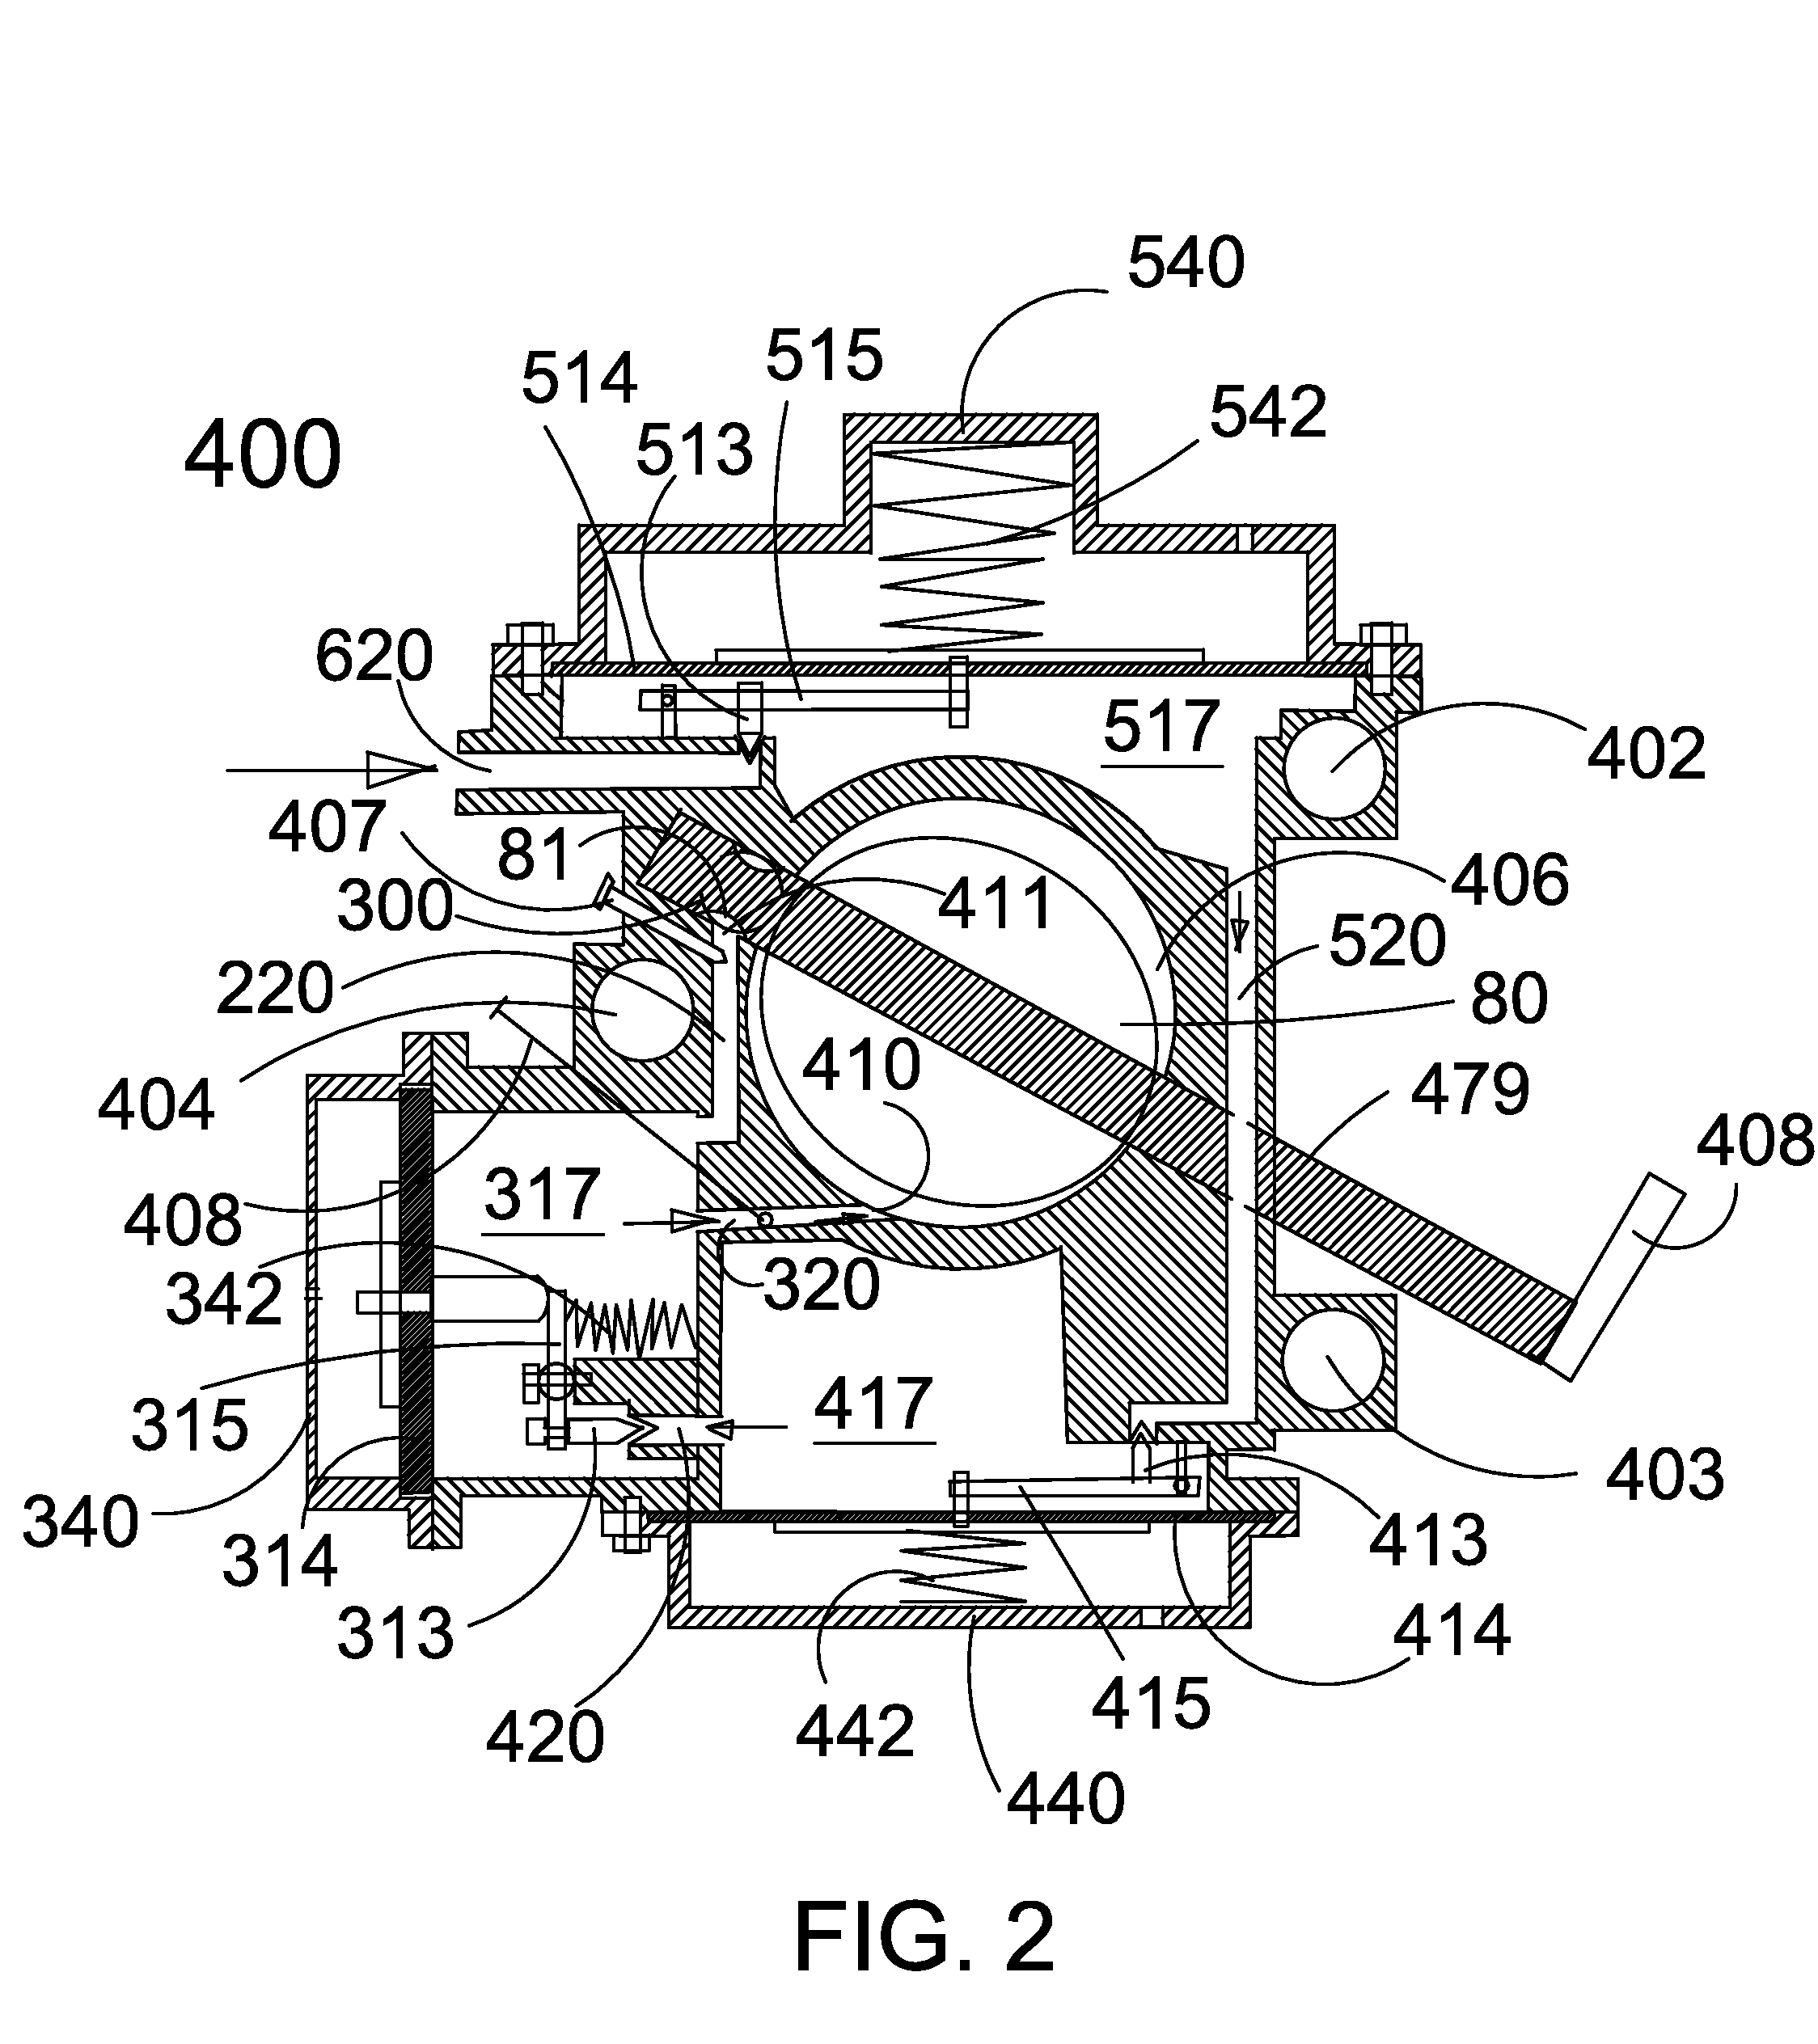 Stratified two-stroke engine and dual passage fuel system